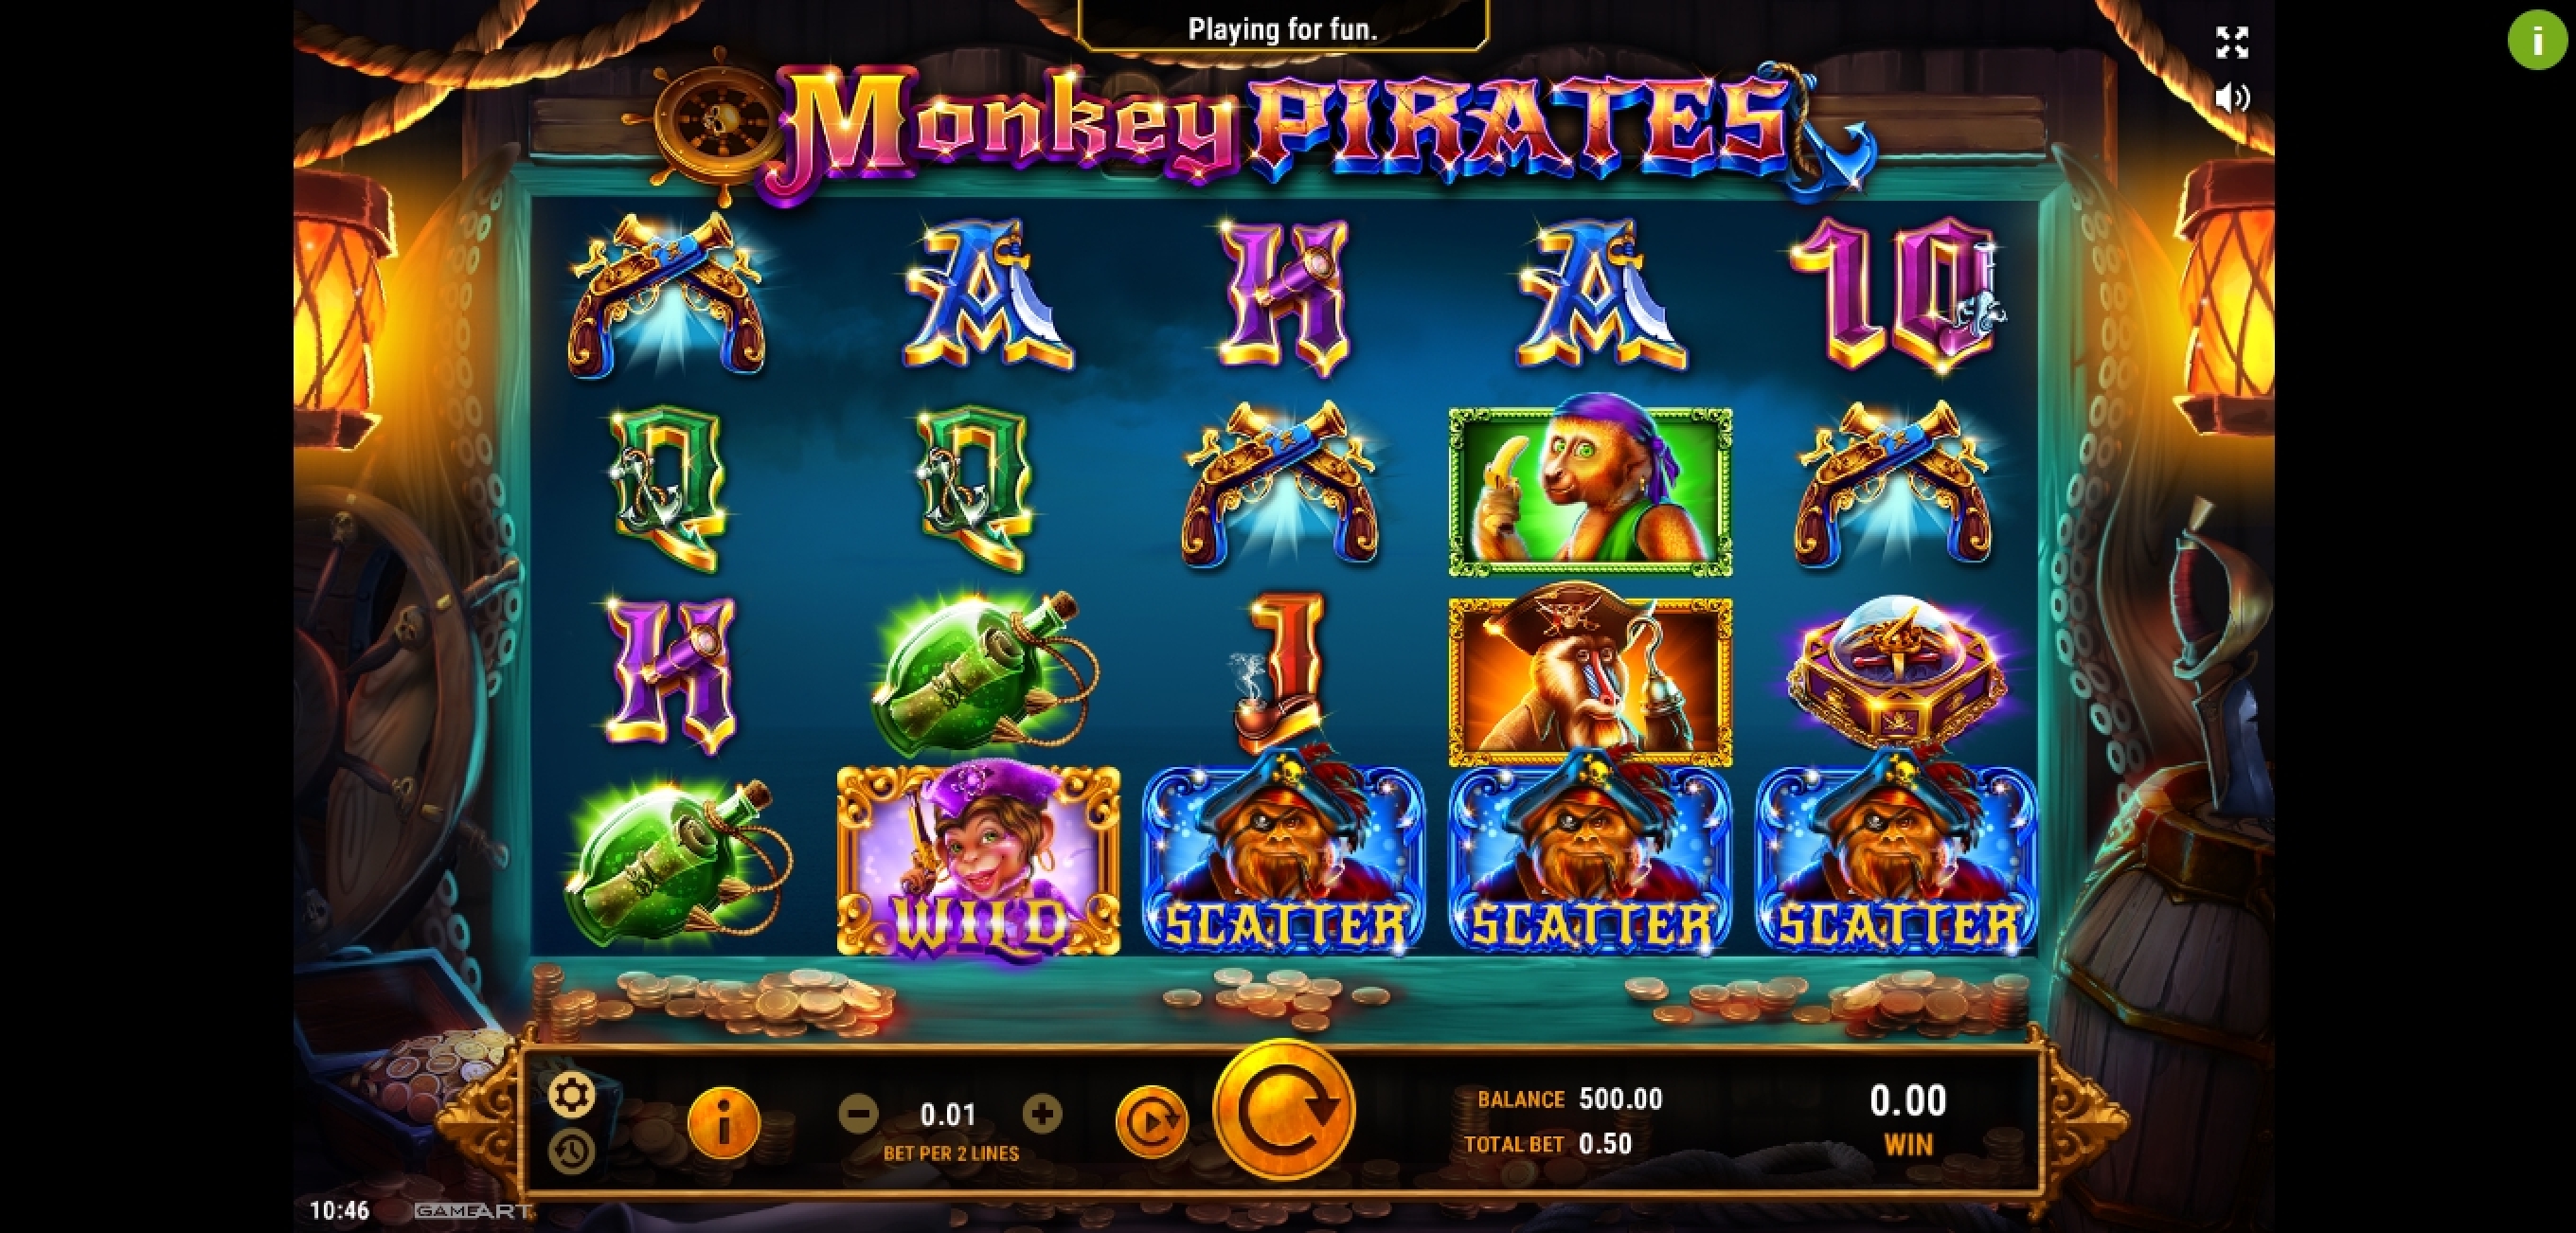 Reels in Monkey Pirates Slot Game by GameArt